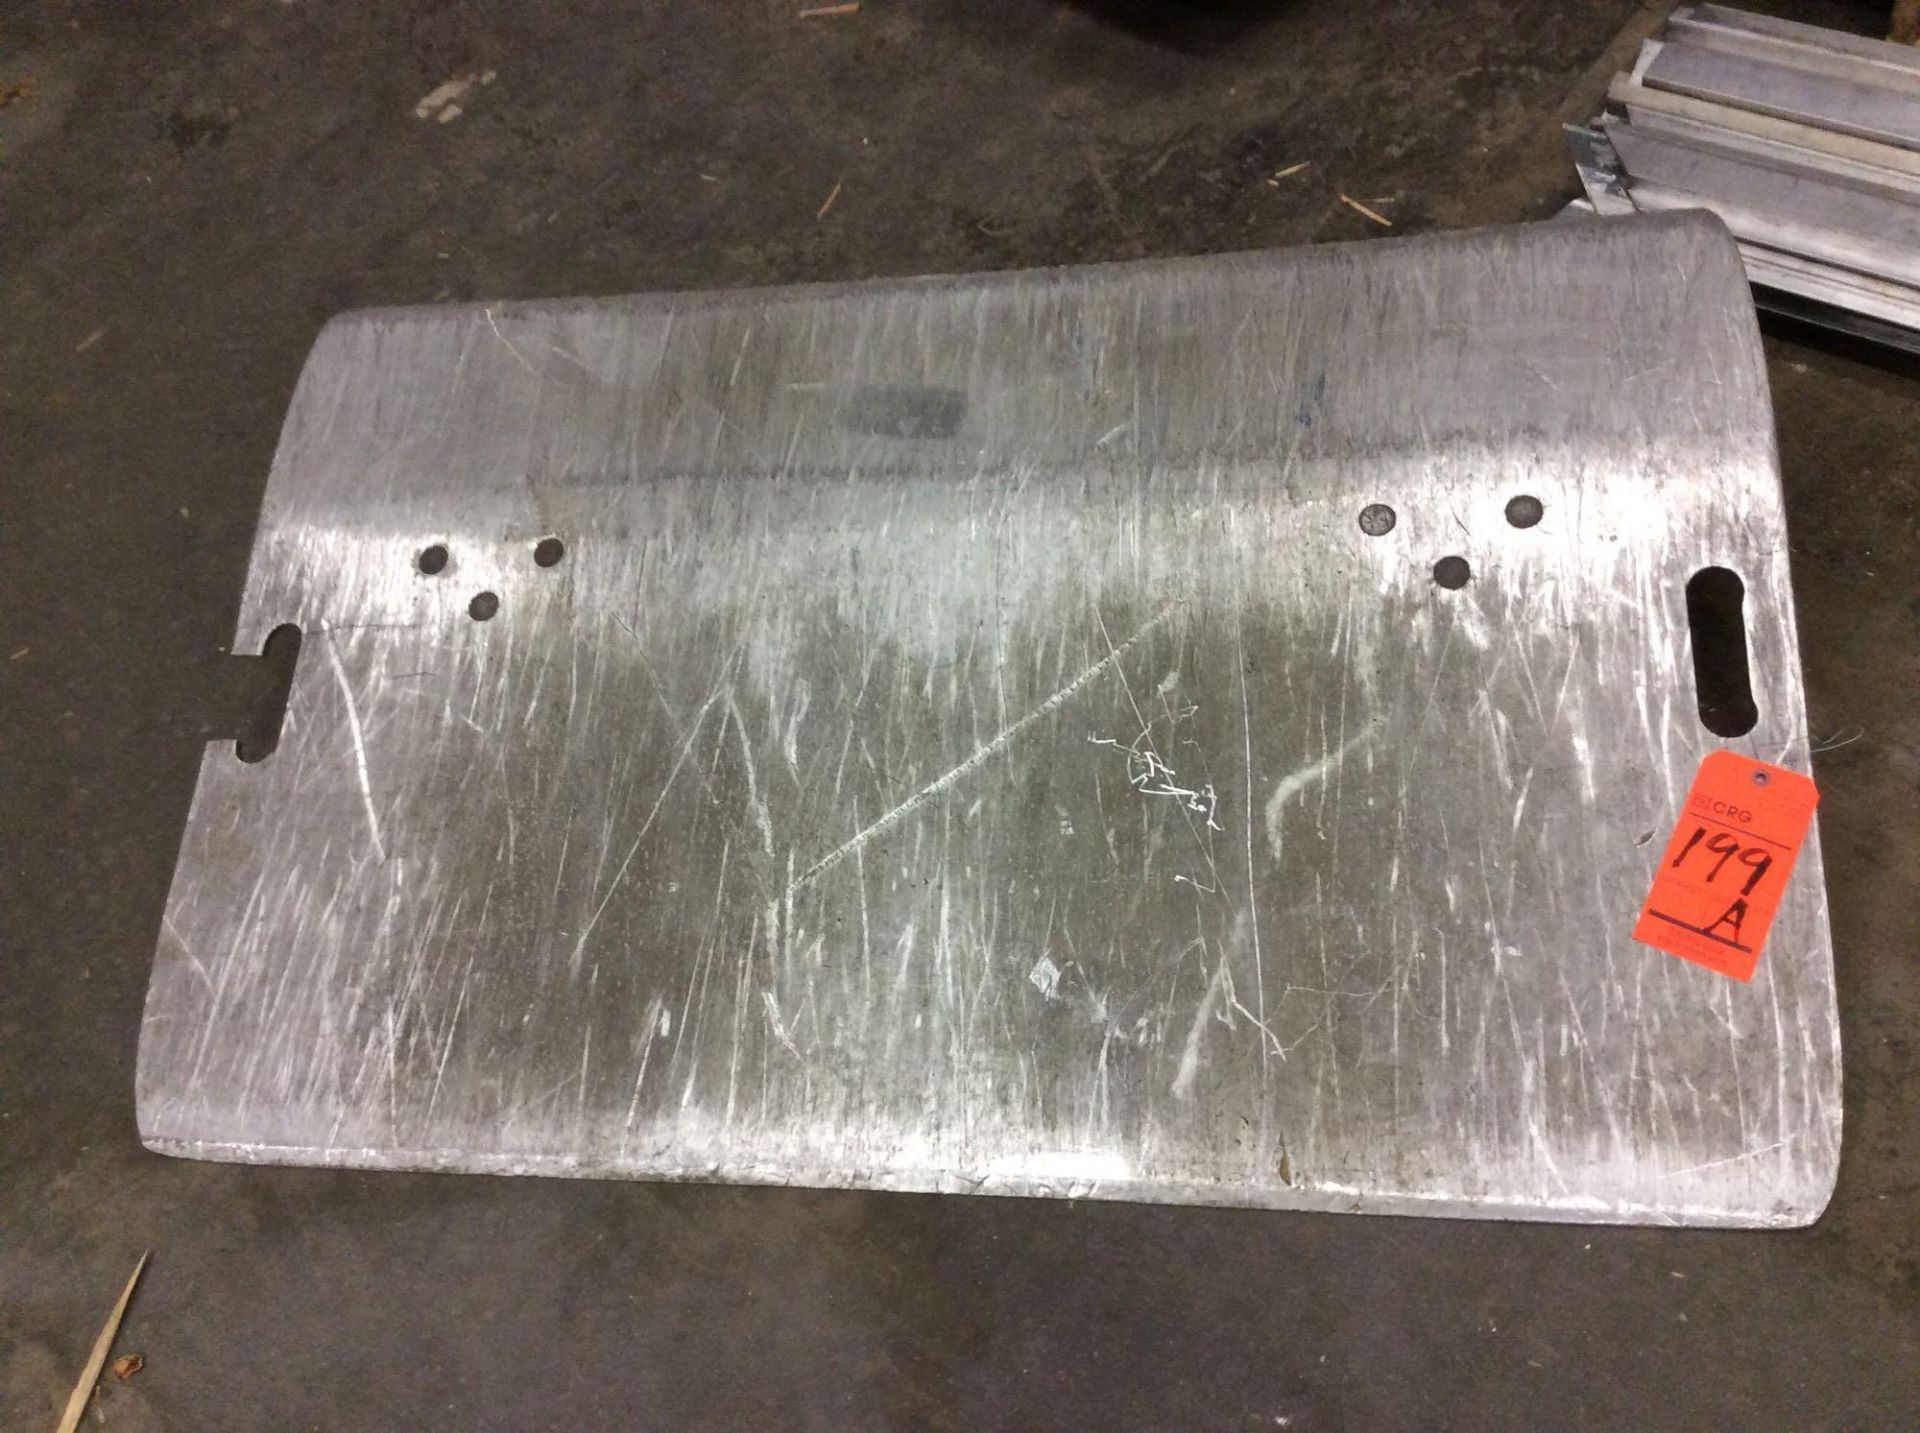 30" x 48" aluminum dockplate with centering tabs